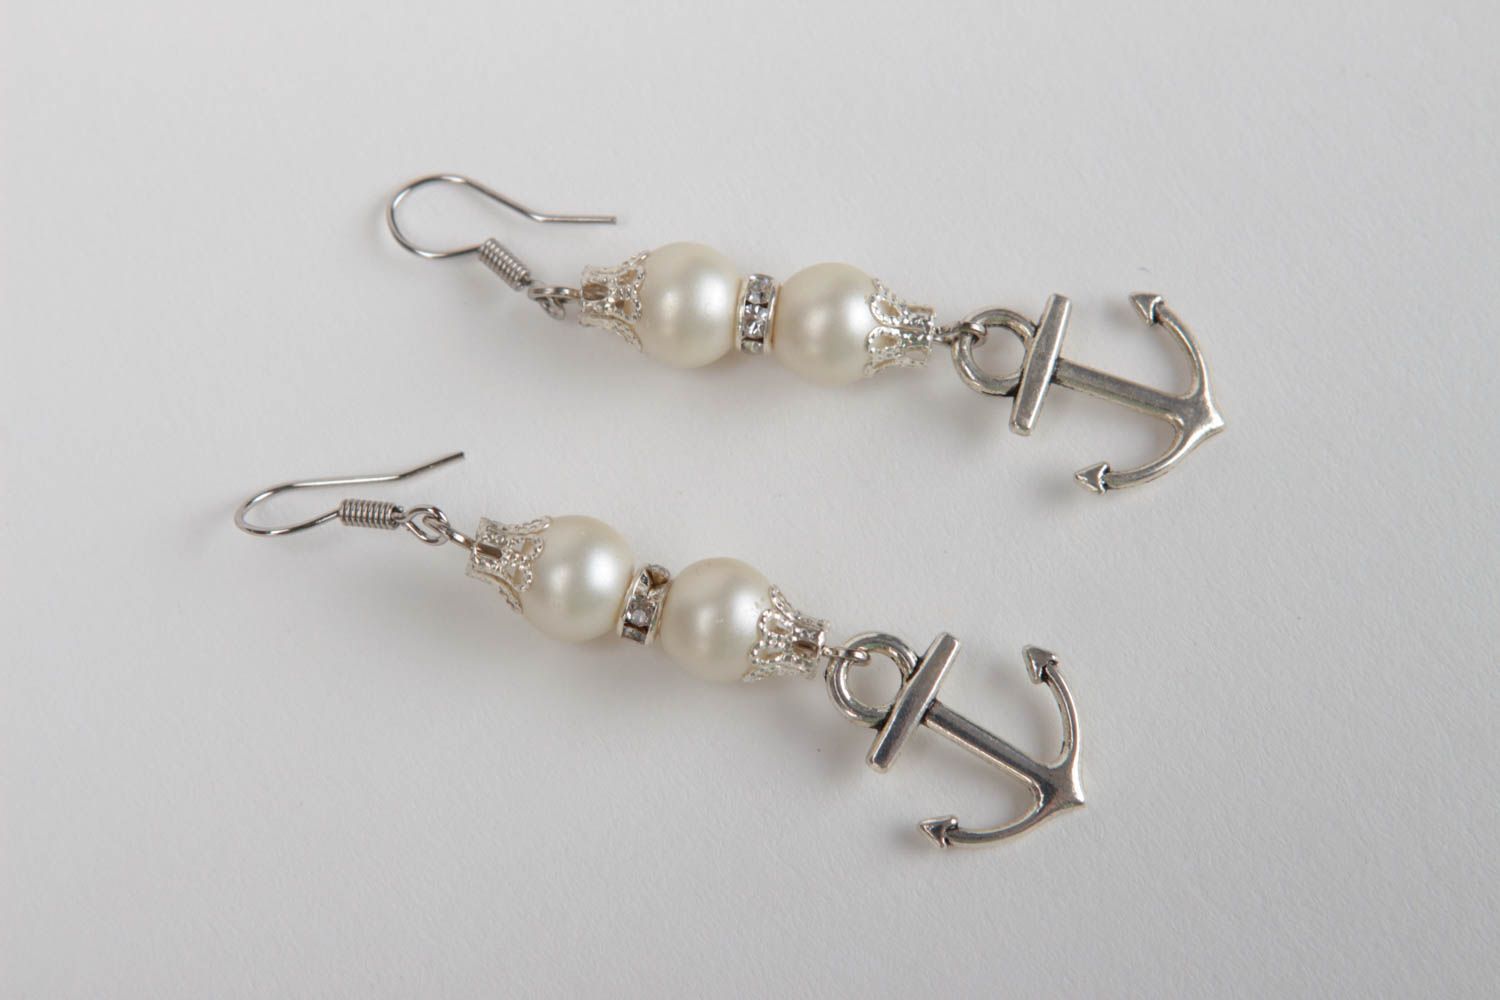 Handcrafted metal earrings with pearl beads designer jewelry gifts for her photo 2